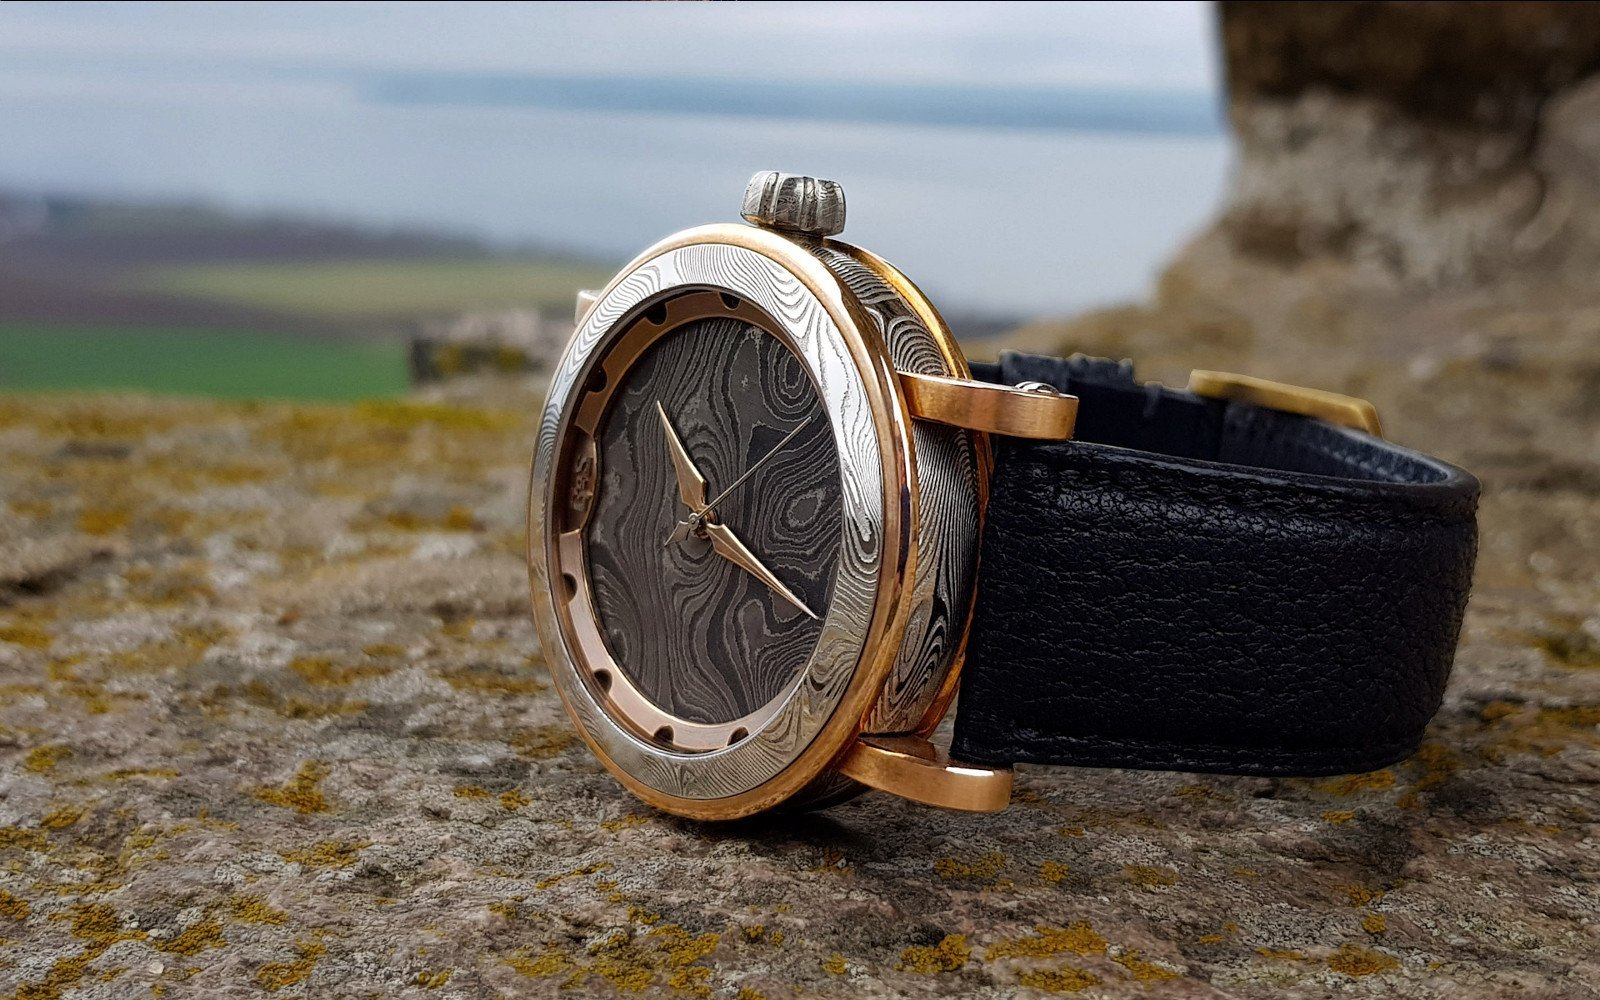 Glowing mother-of-pearl in new Sarek watches from GoS